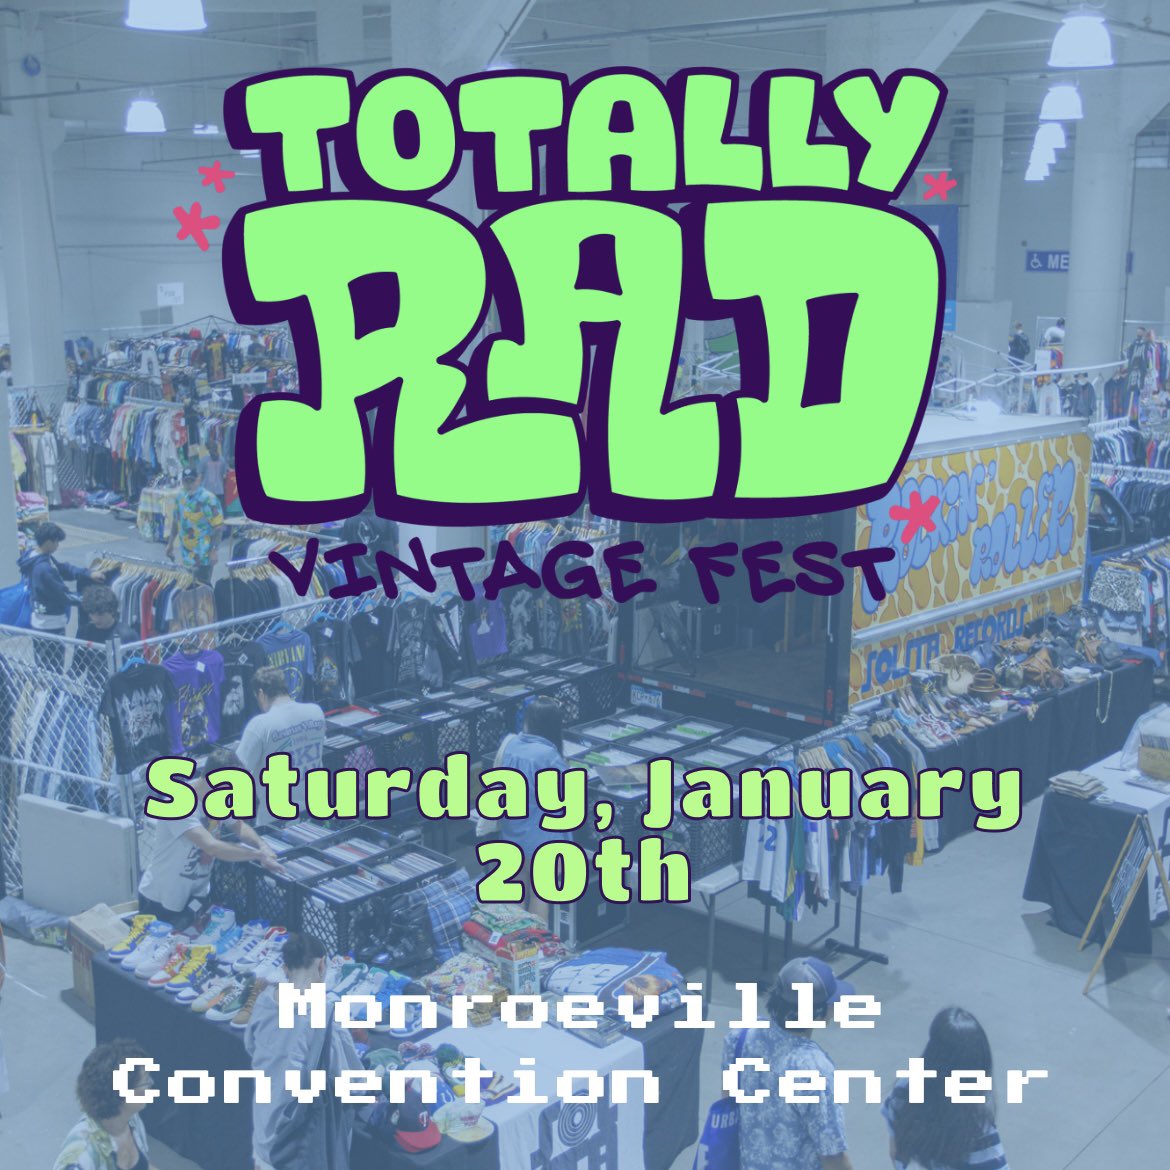 We’re getting ready for the #TotallyRadVintageFest in 2 wks…pulling our best #vintage #popculture items…books, toys, games, music, comics & more! It’s gonna be a fun time with a ton of great vendors…don’t miss it! #pittsburgh #monroeville #80s #90s #y2k #generationx #genx